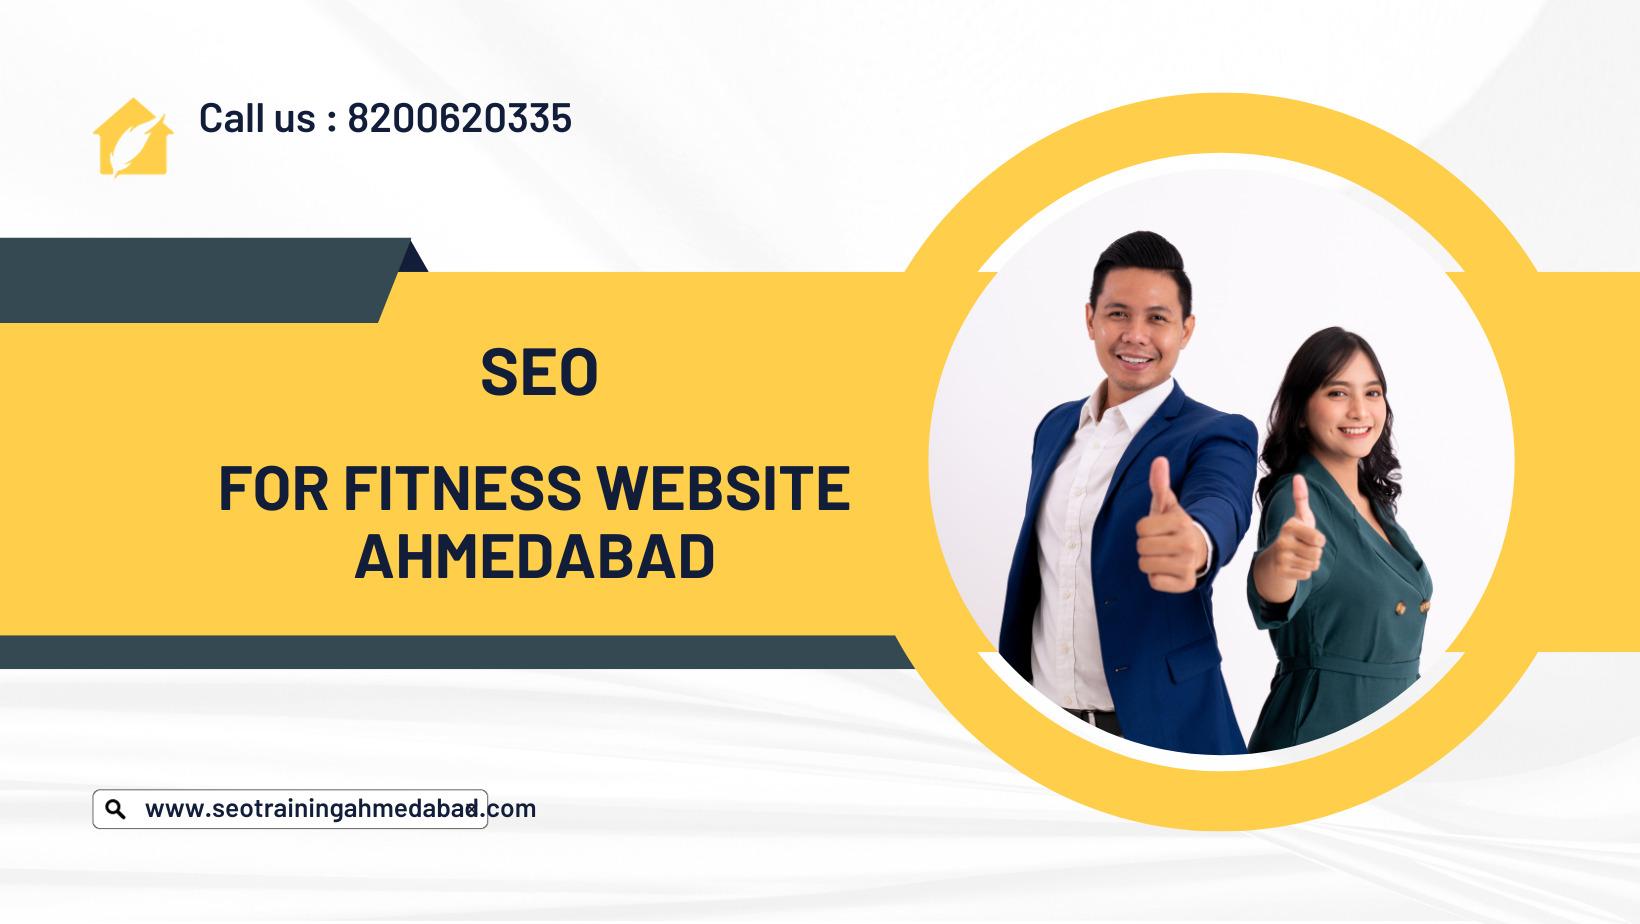 SEO For Fitness Website Ahmedabad